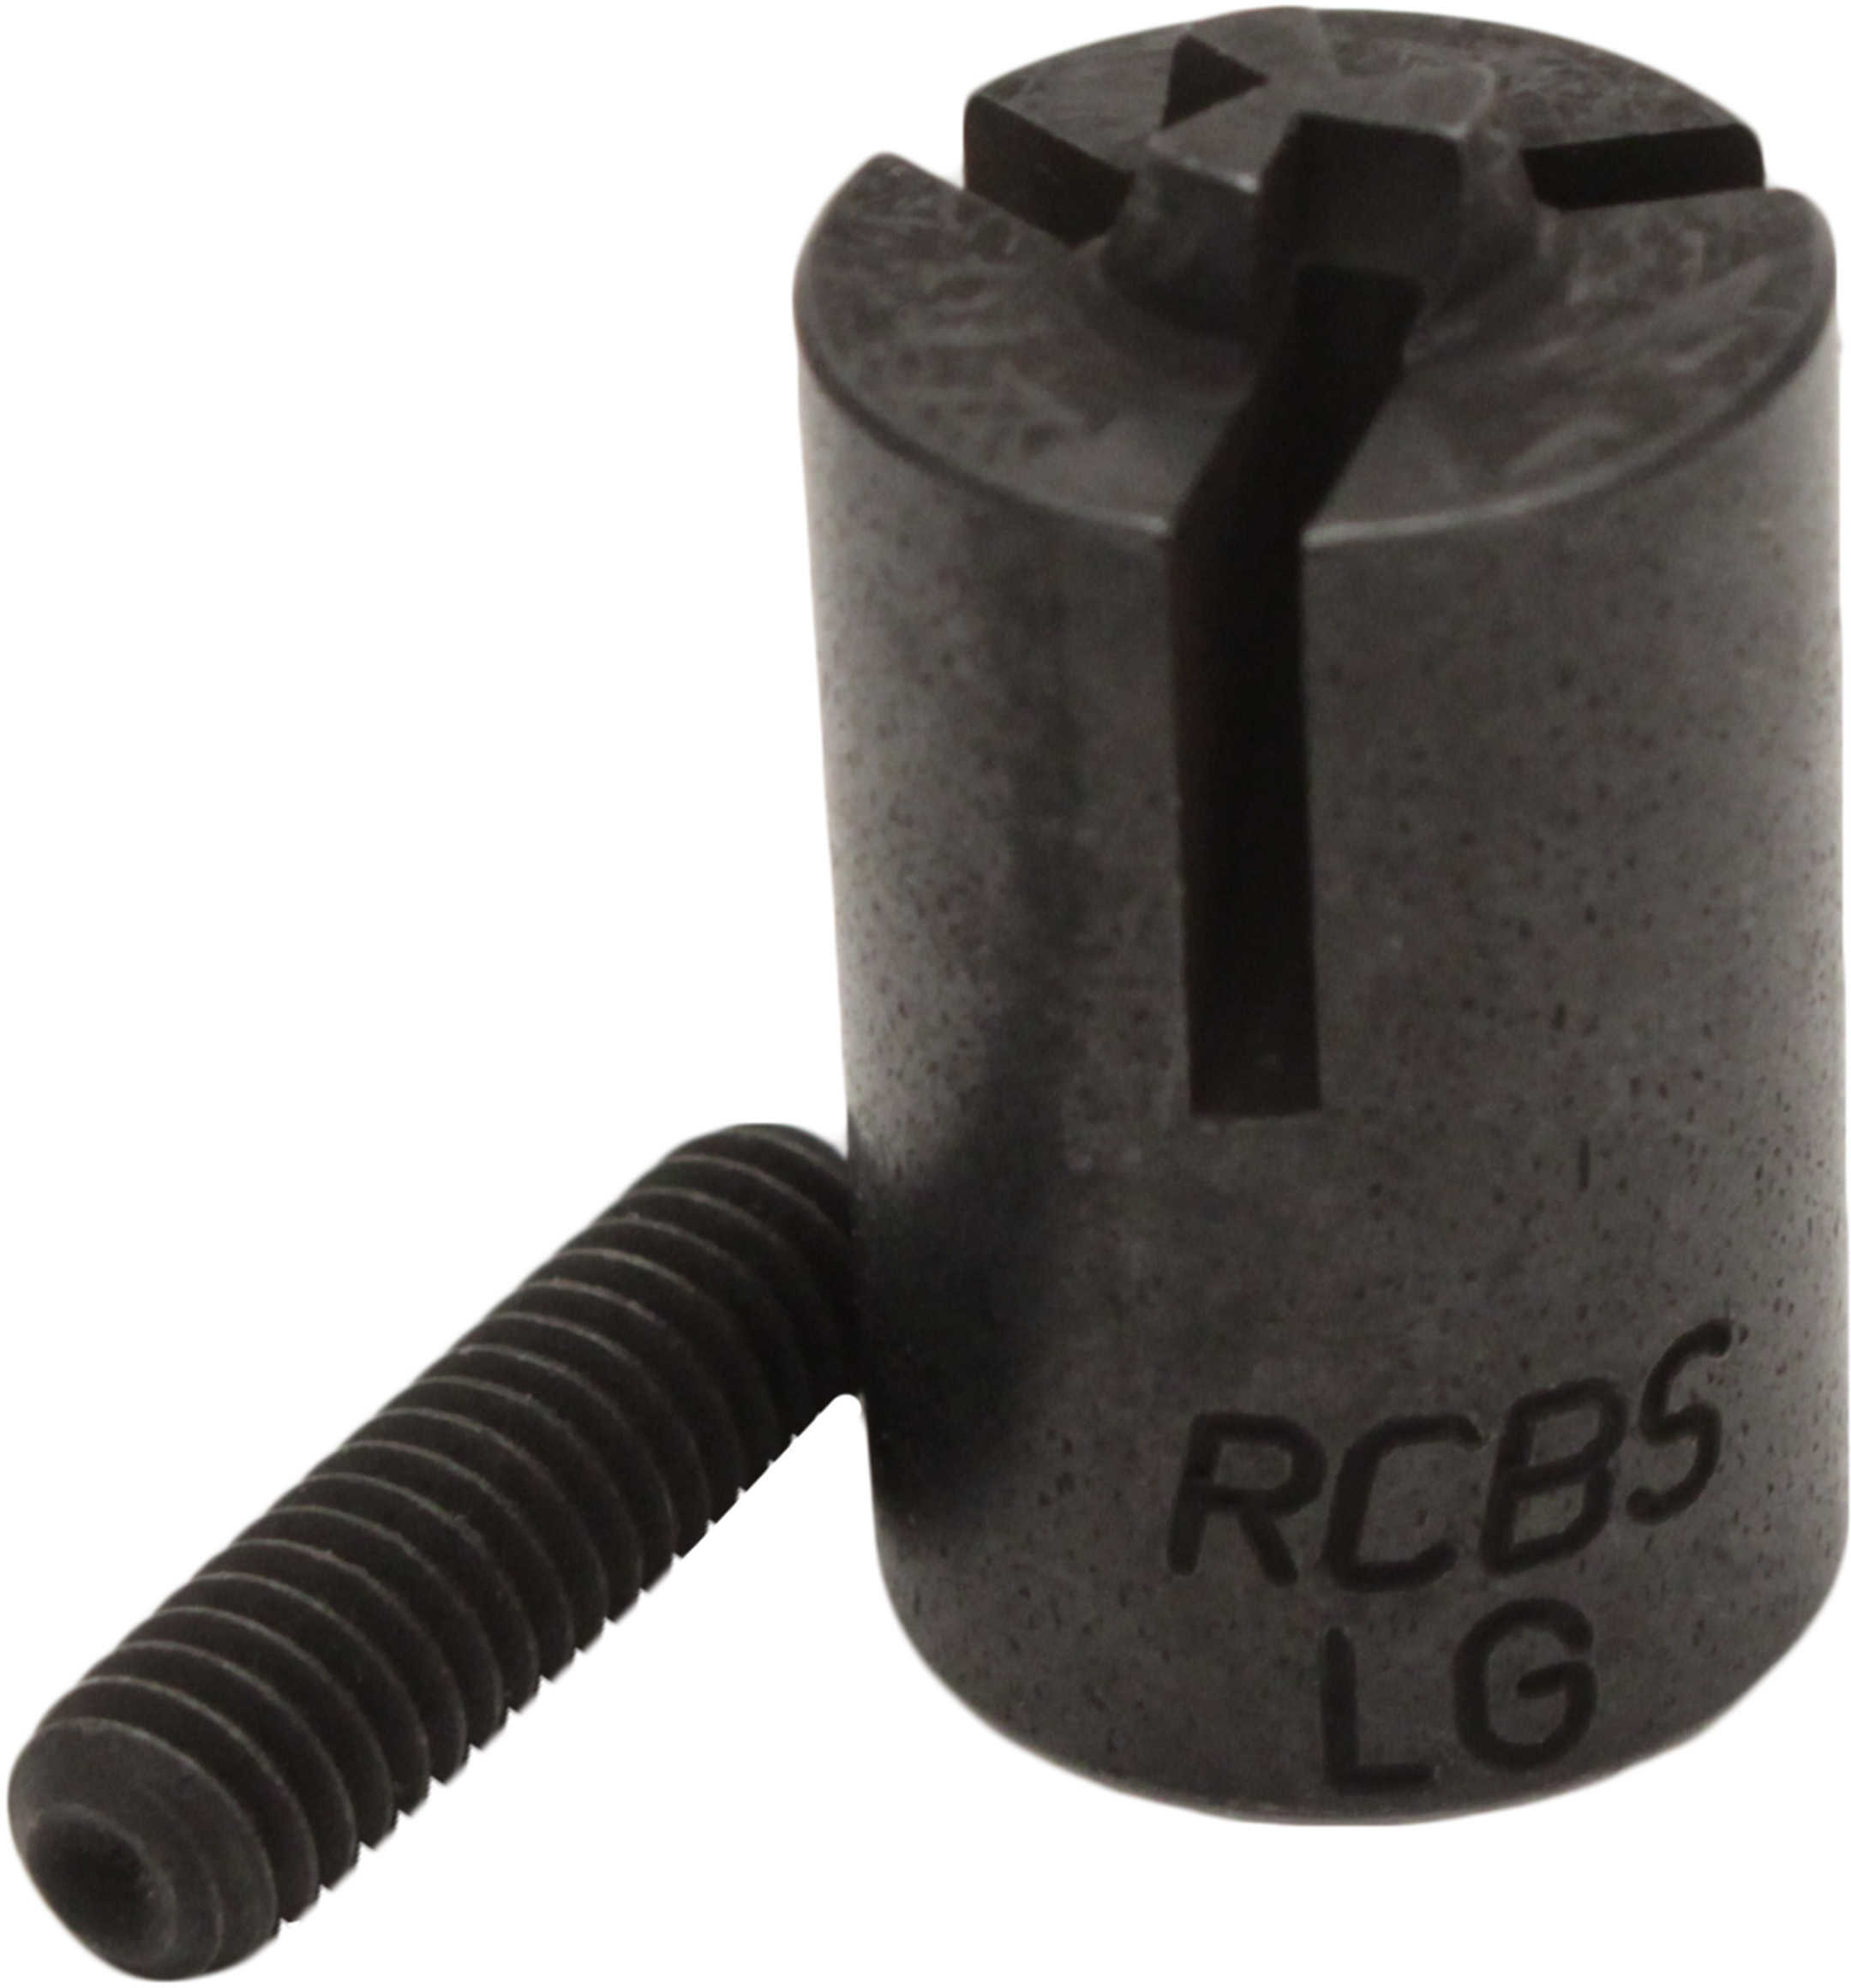 RCBS 90387 Military Crimp Remover 1 Large